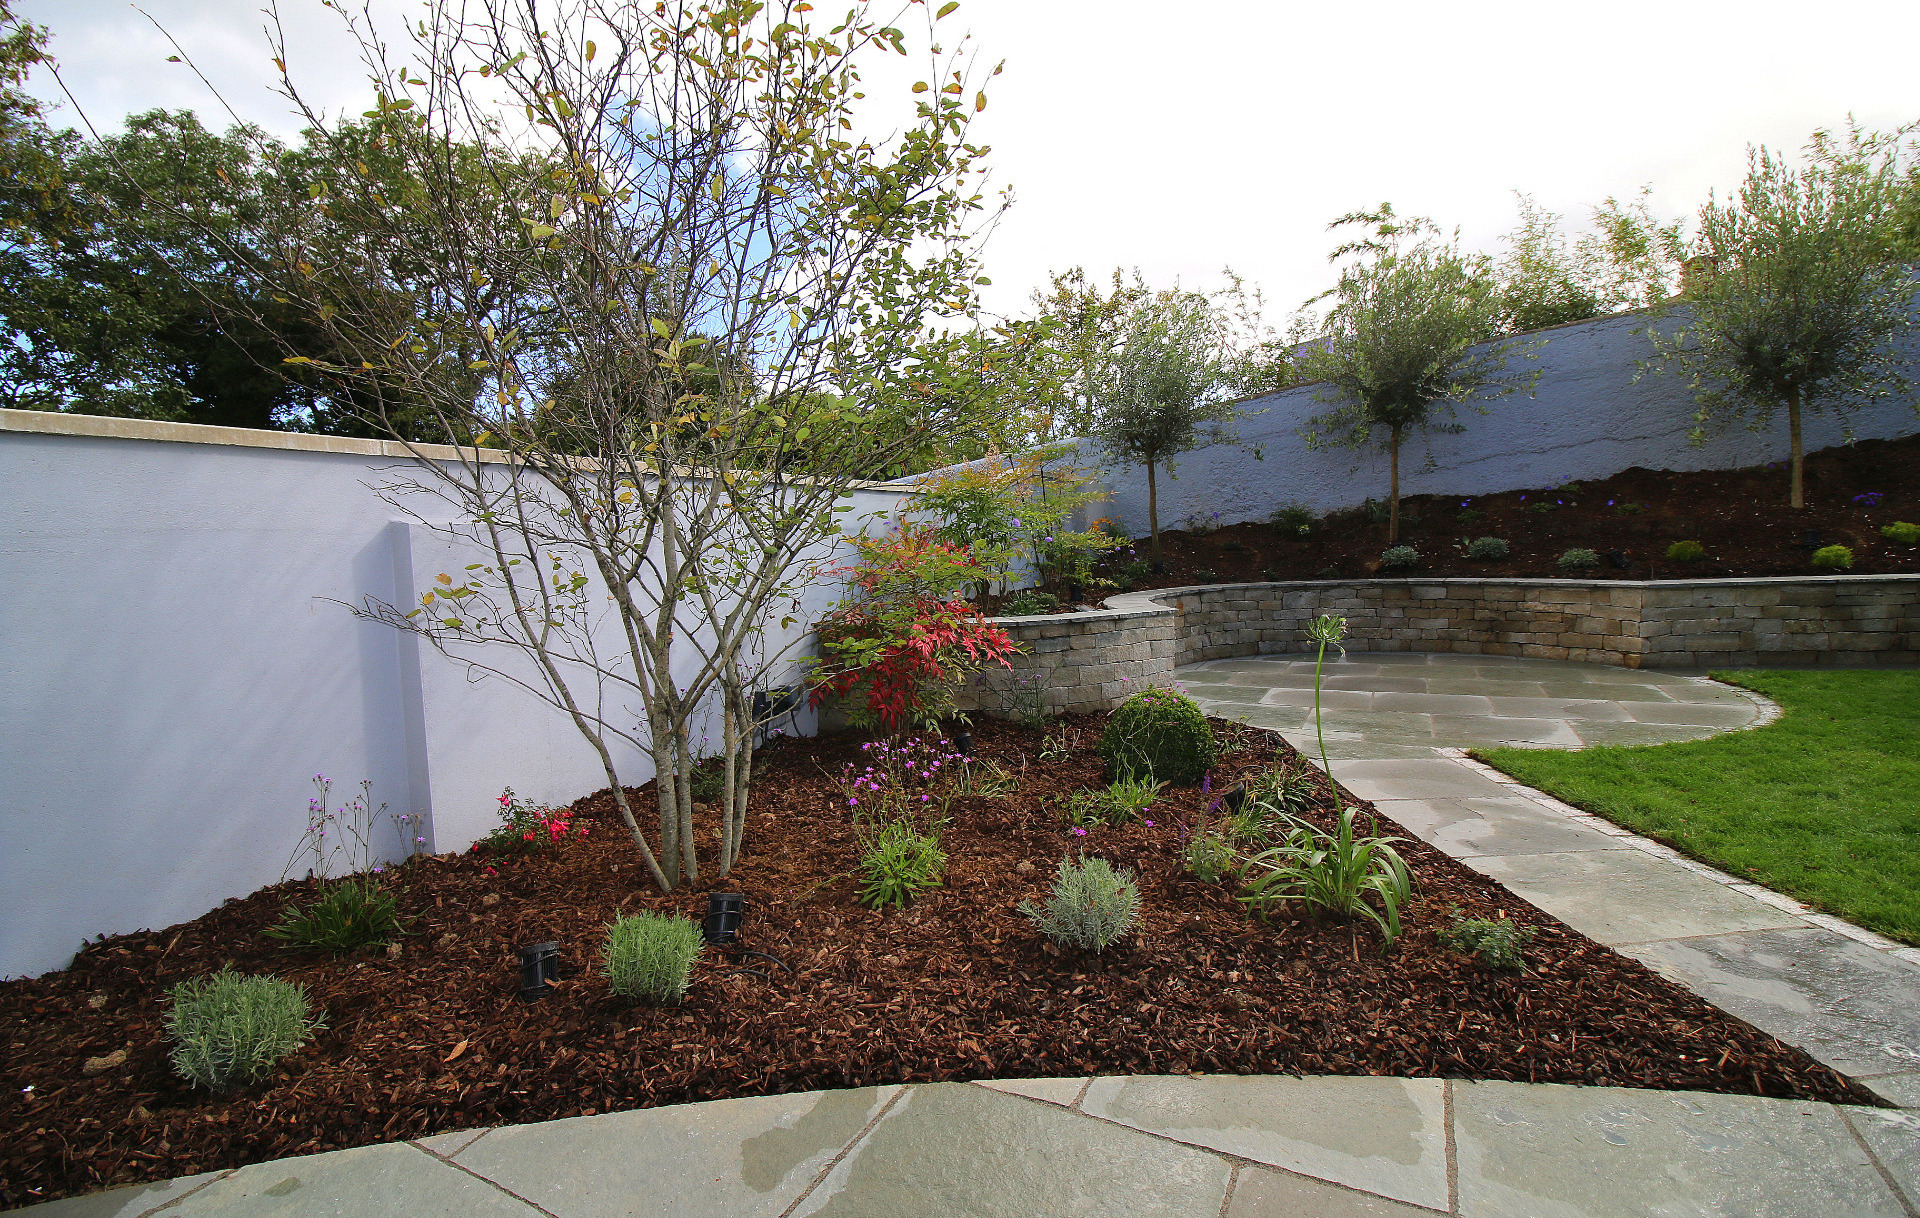 Generous planting beds combine beautifully with the paved areas